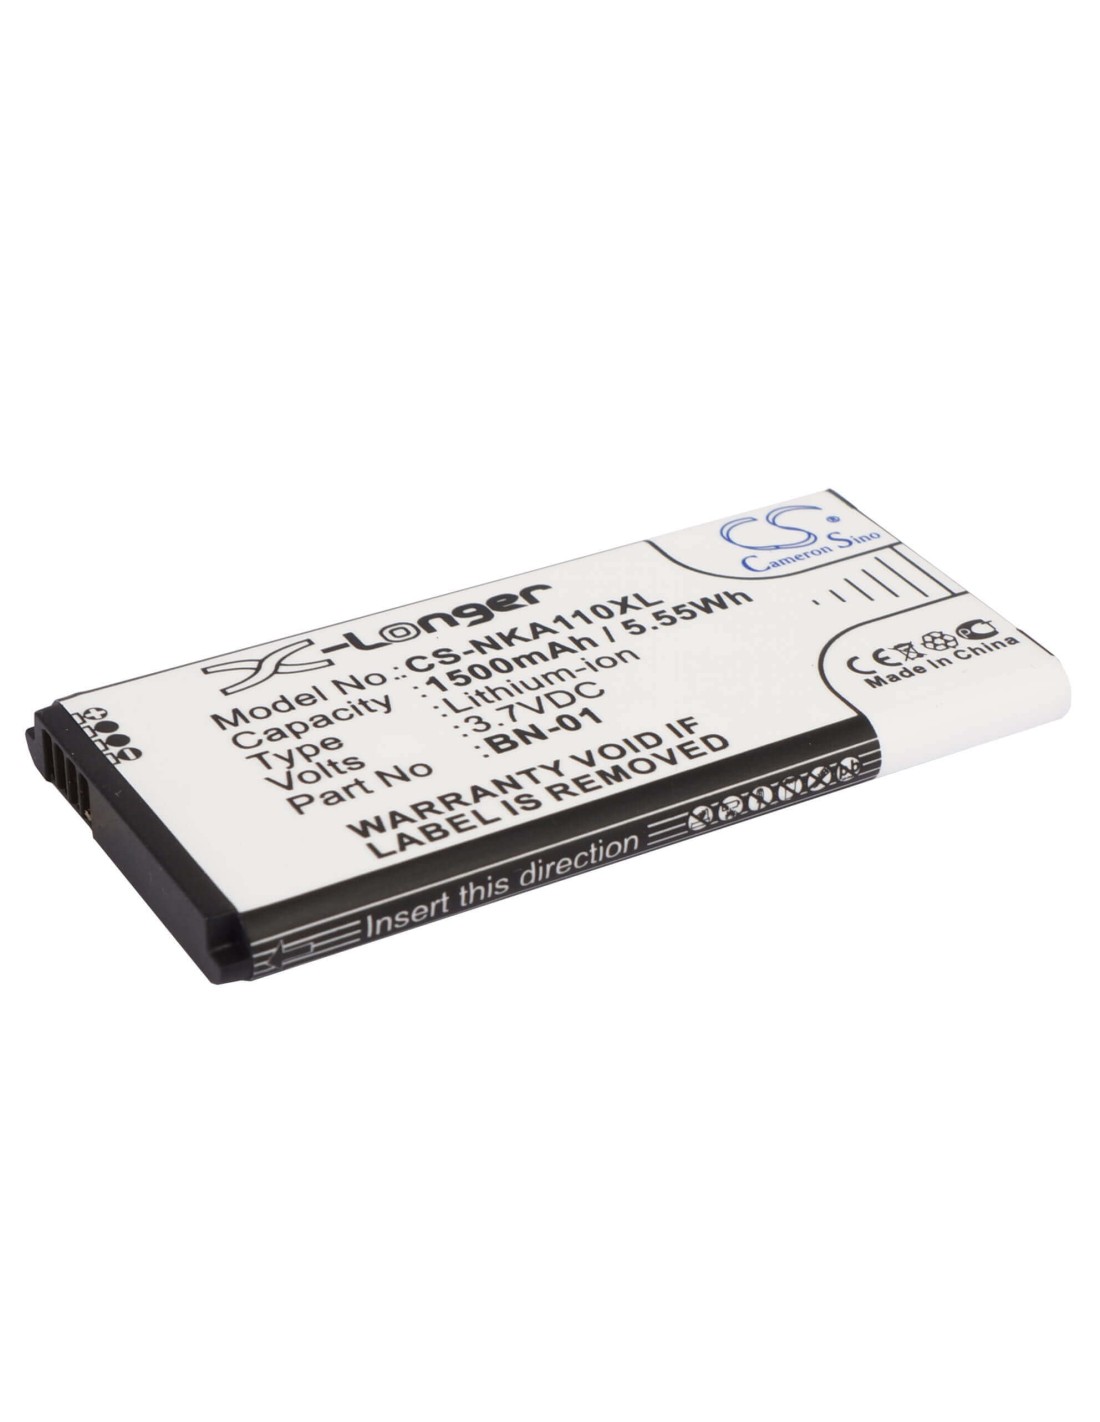 Battery for Nokia X, X+, A110 3.7V, 1500mAh - 5.55Wh